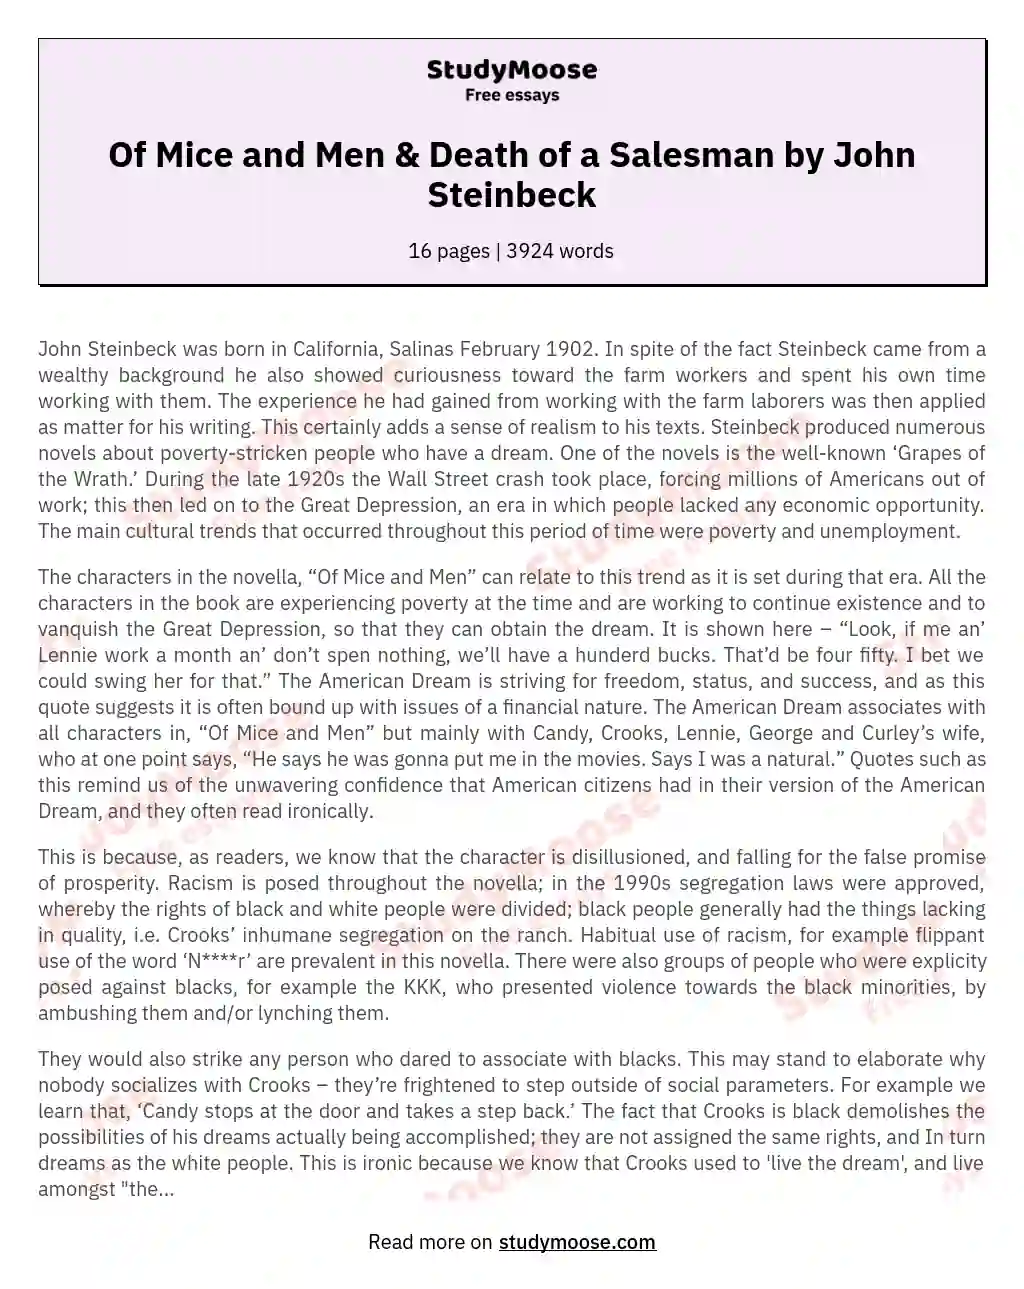 Of Mice and Men & Death of a Salesman by John Steinbeck